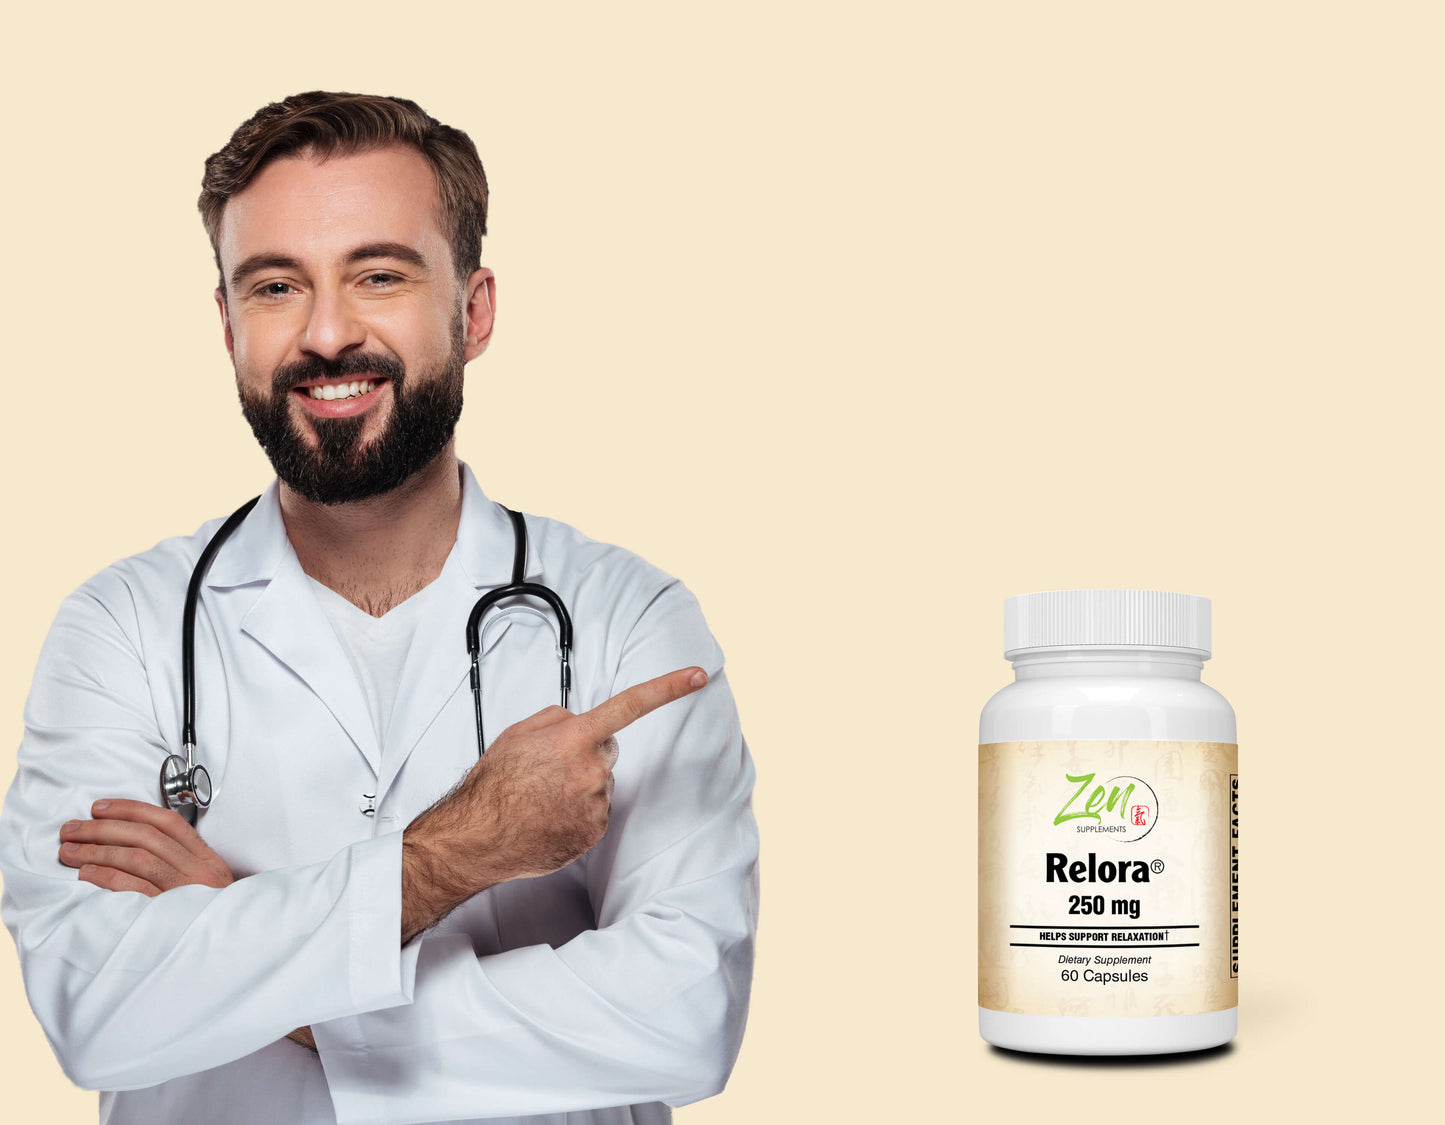 Relora 250mg Relaxtion Support - 60 Softgel